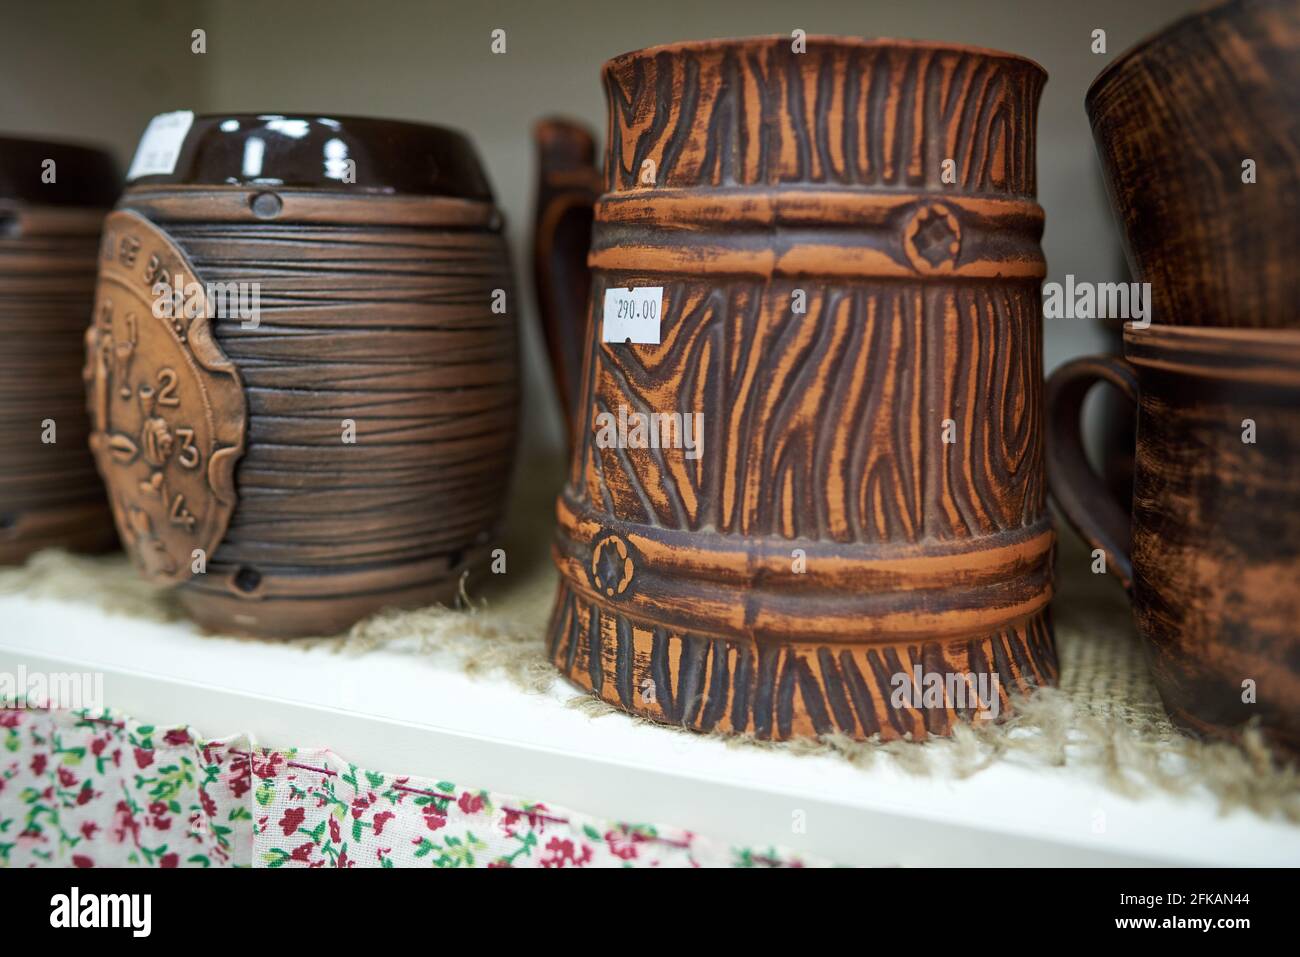 Clay beer mug and other clay products Stock Photo